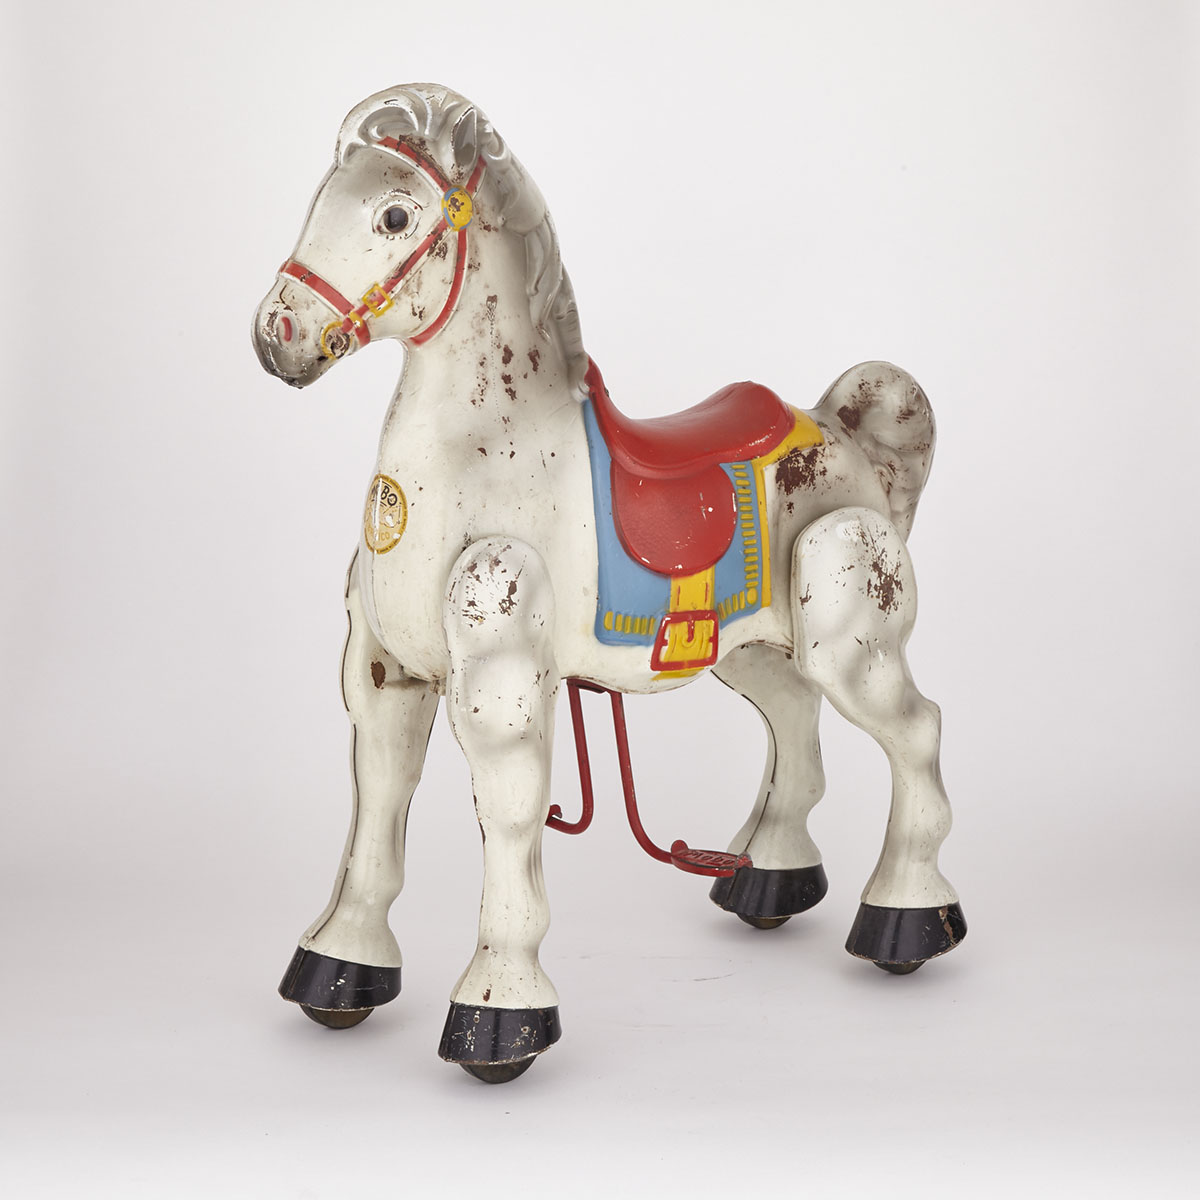 English Painted Steel ‘Mobo Bronco’ Riding Horse Toy by D. Sebel & Co., East London, 1947